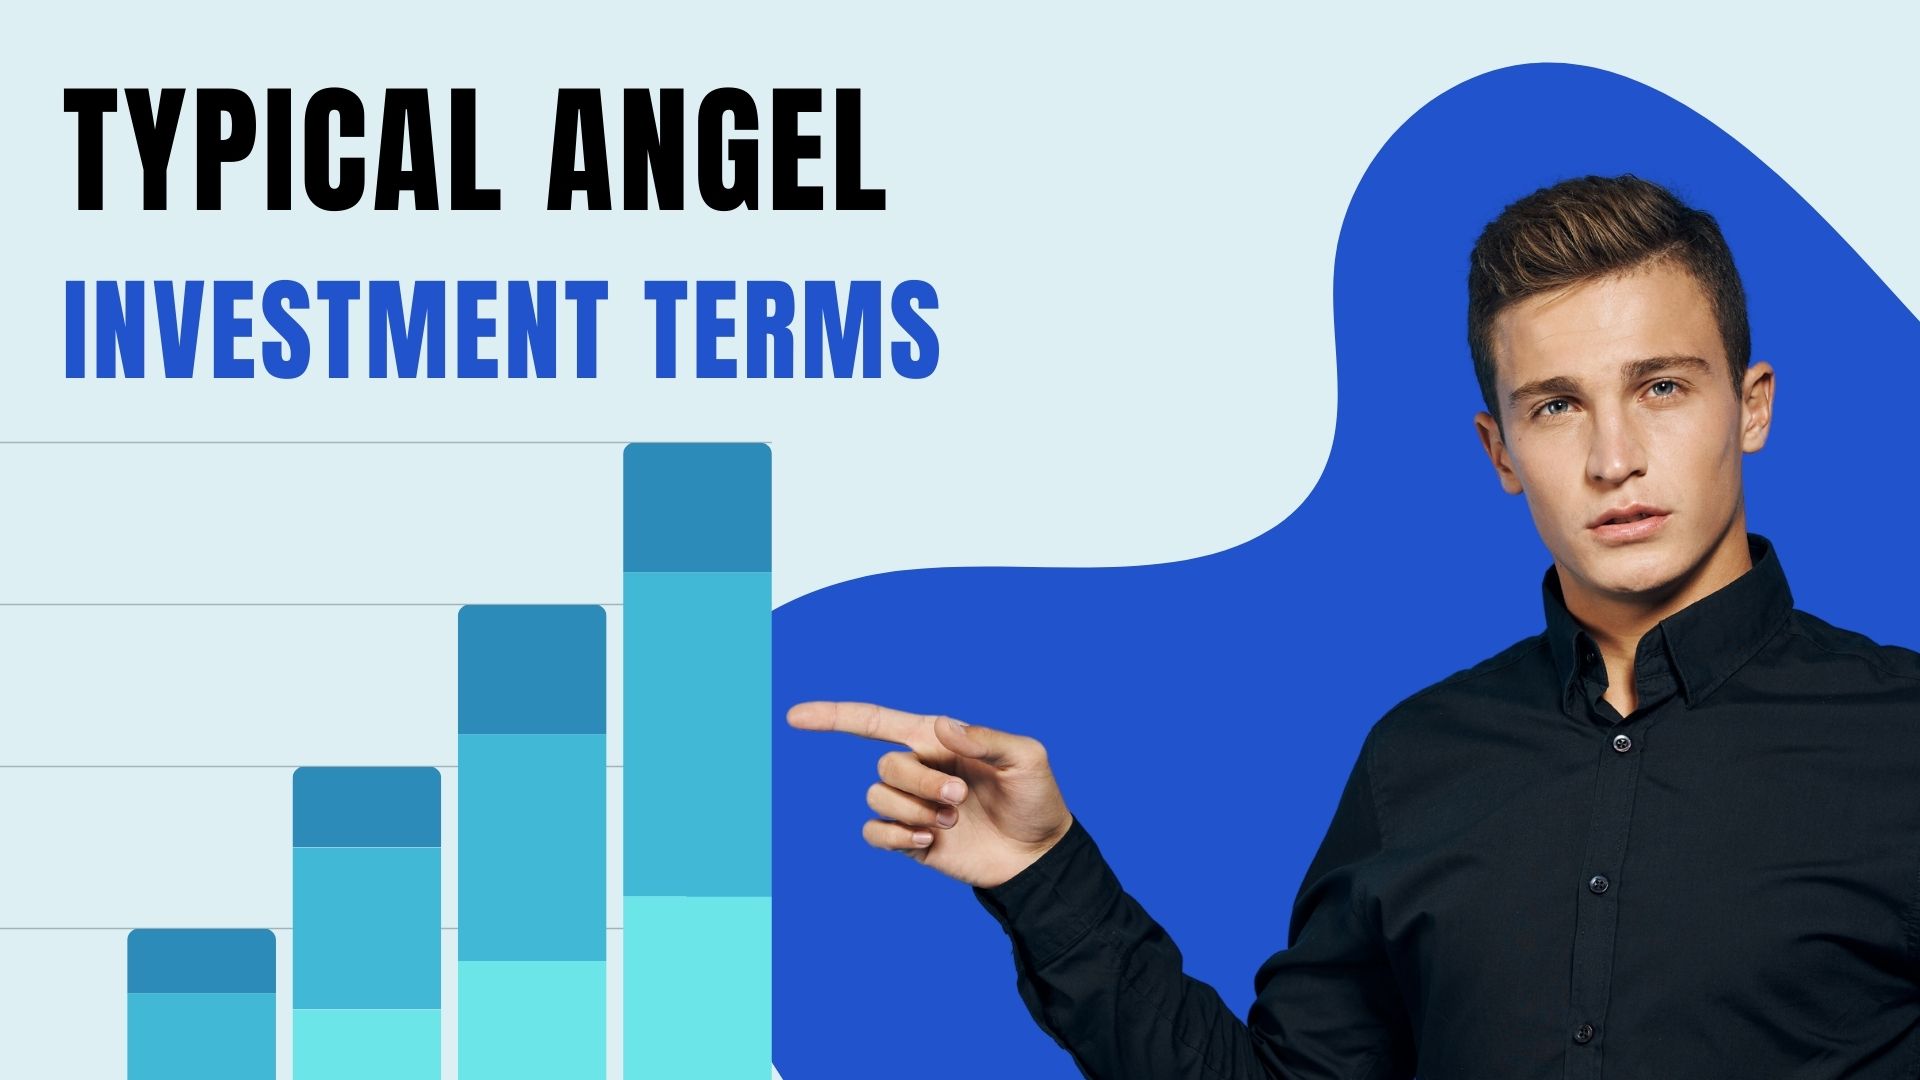 Typical Angel Investment Terms